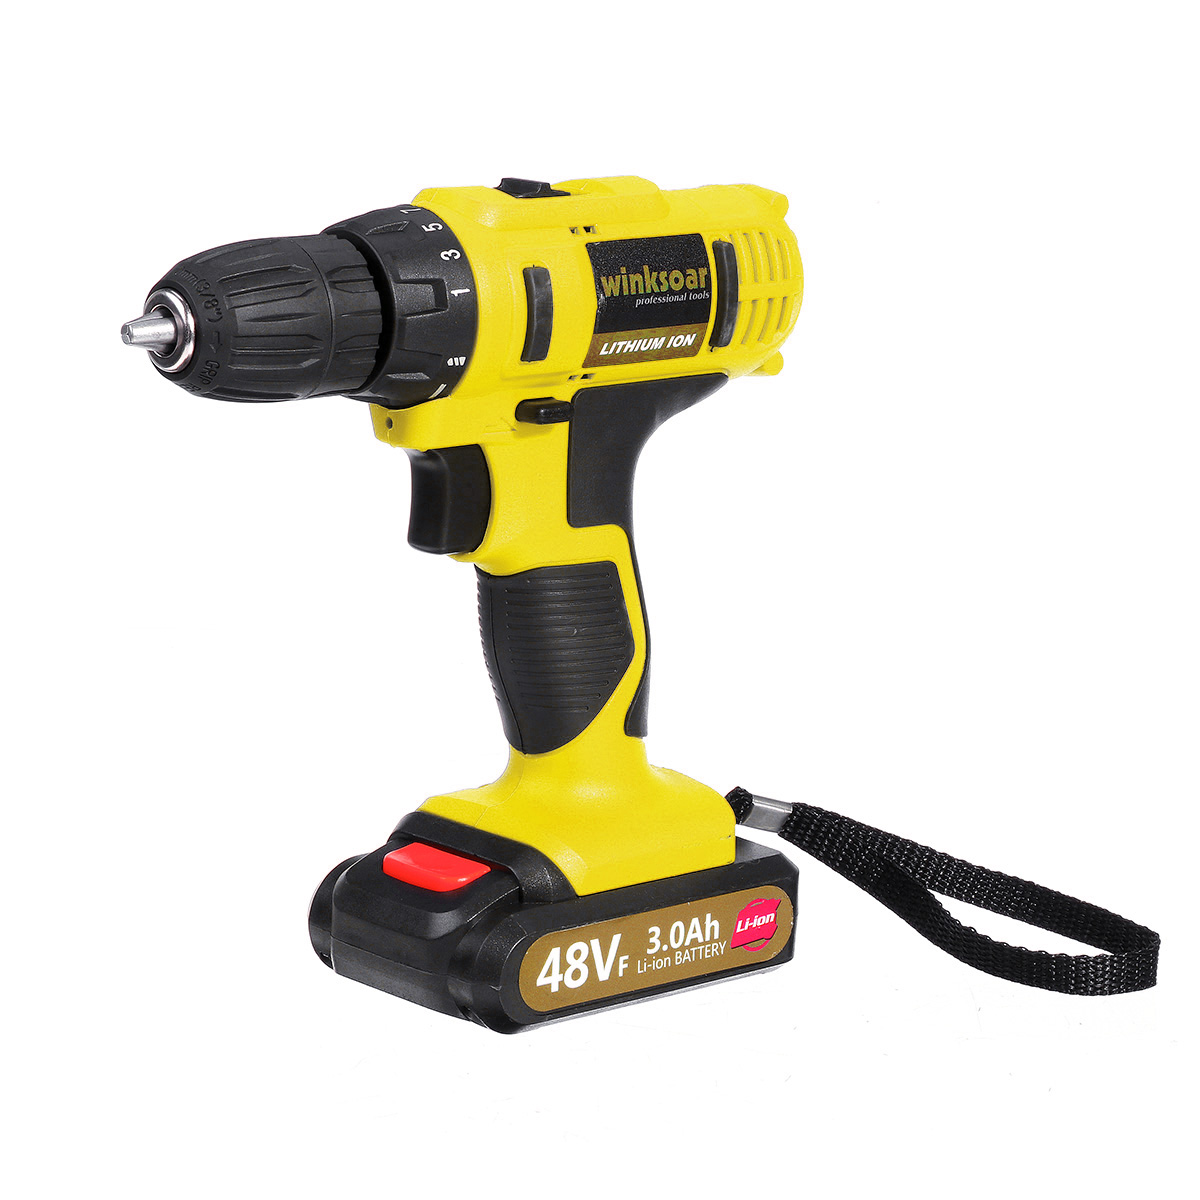 48V Electric Screwdriver Cordless Drill Rechargeable Li-Ion Battery Operated Handheld Drill Battery Charging 2 Speed Power Tools